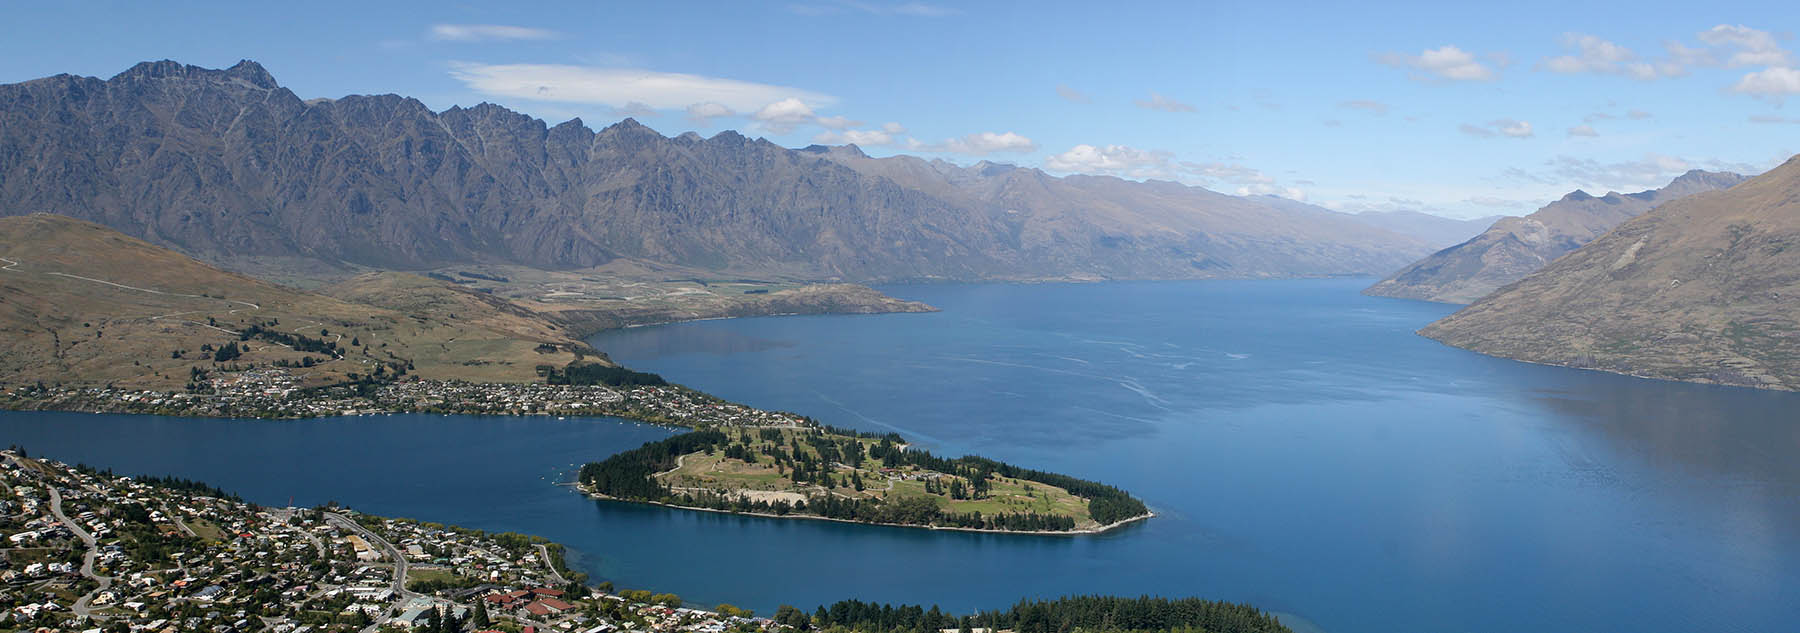 Queenstown - Arrival and the Gondola